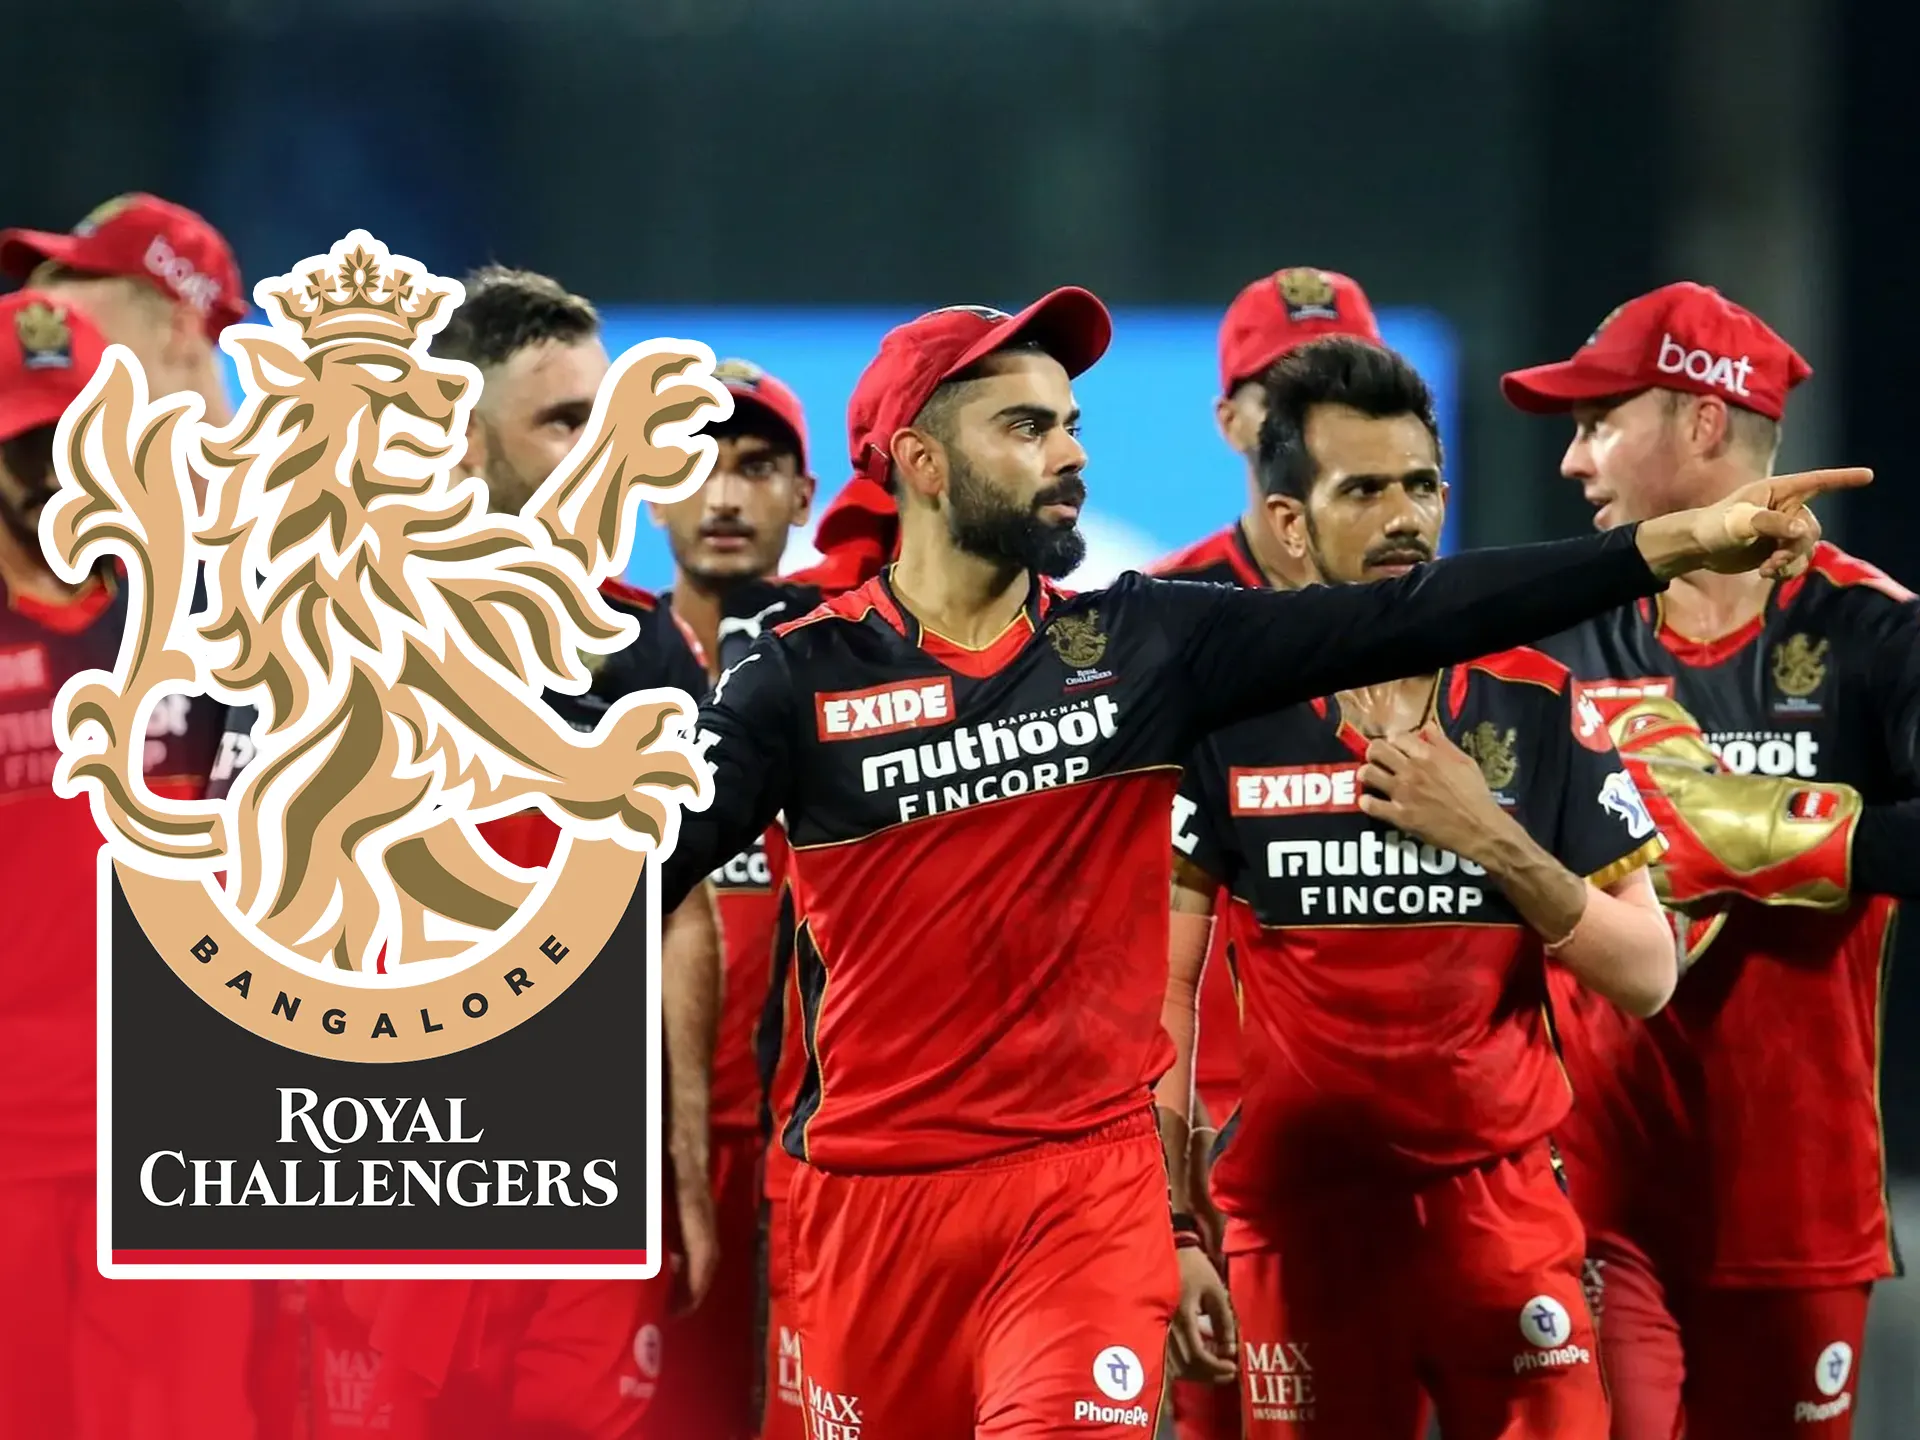 Bet on Royal Challengers Bangalore for winning a lot of money.